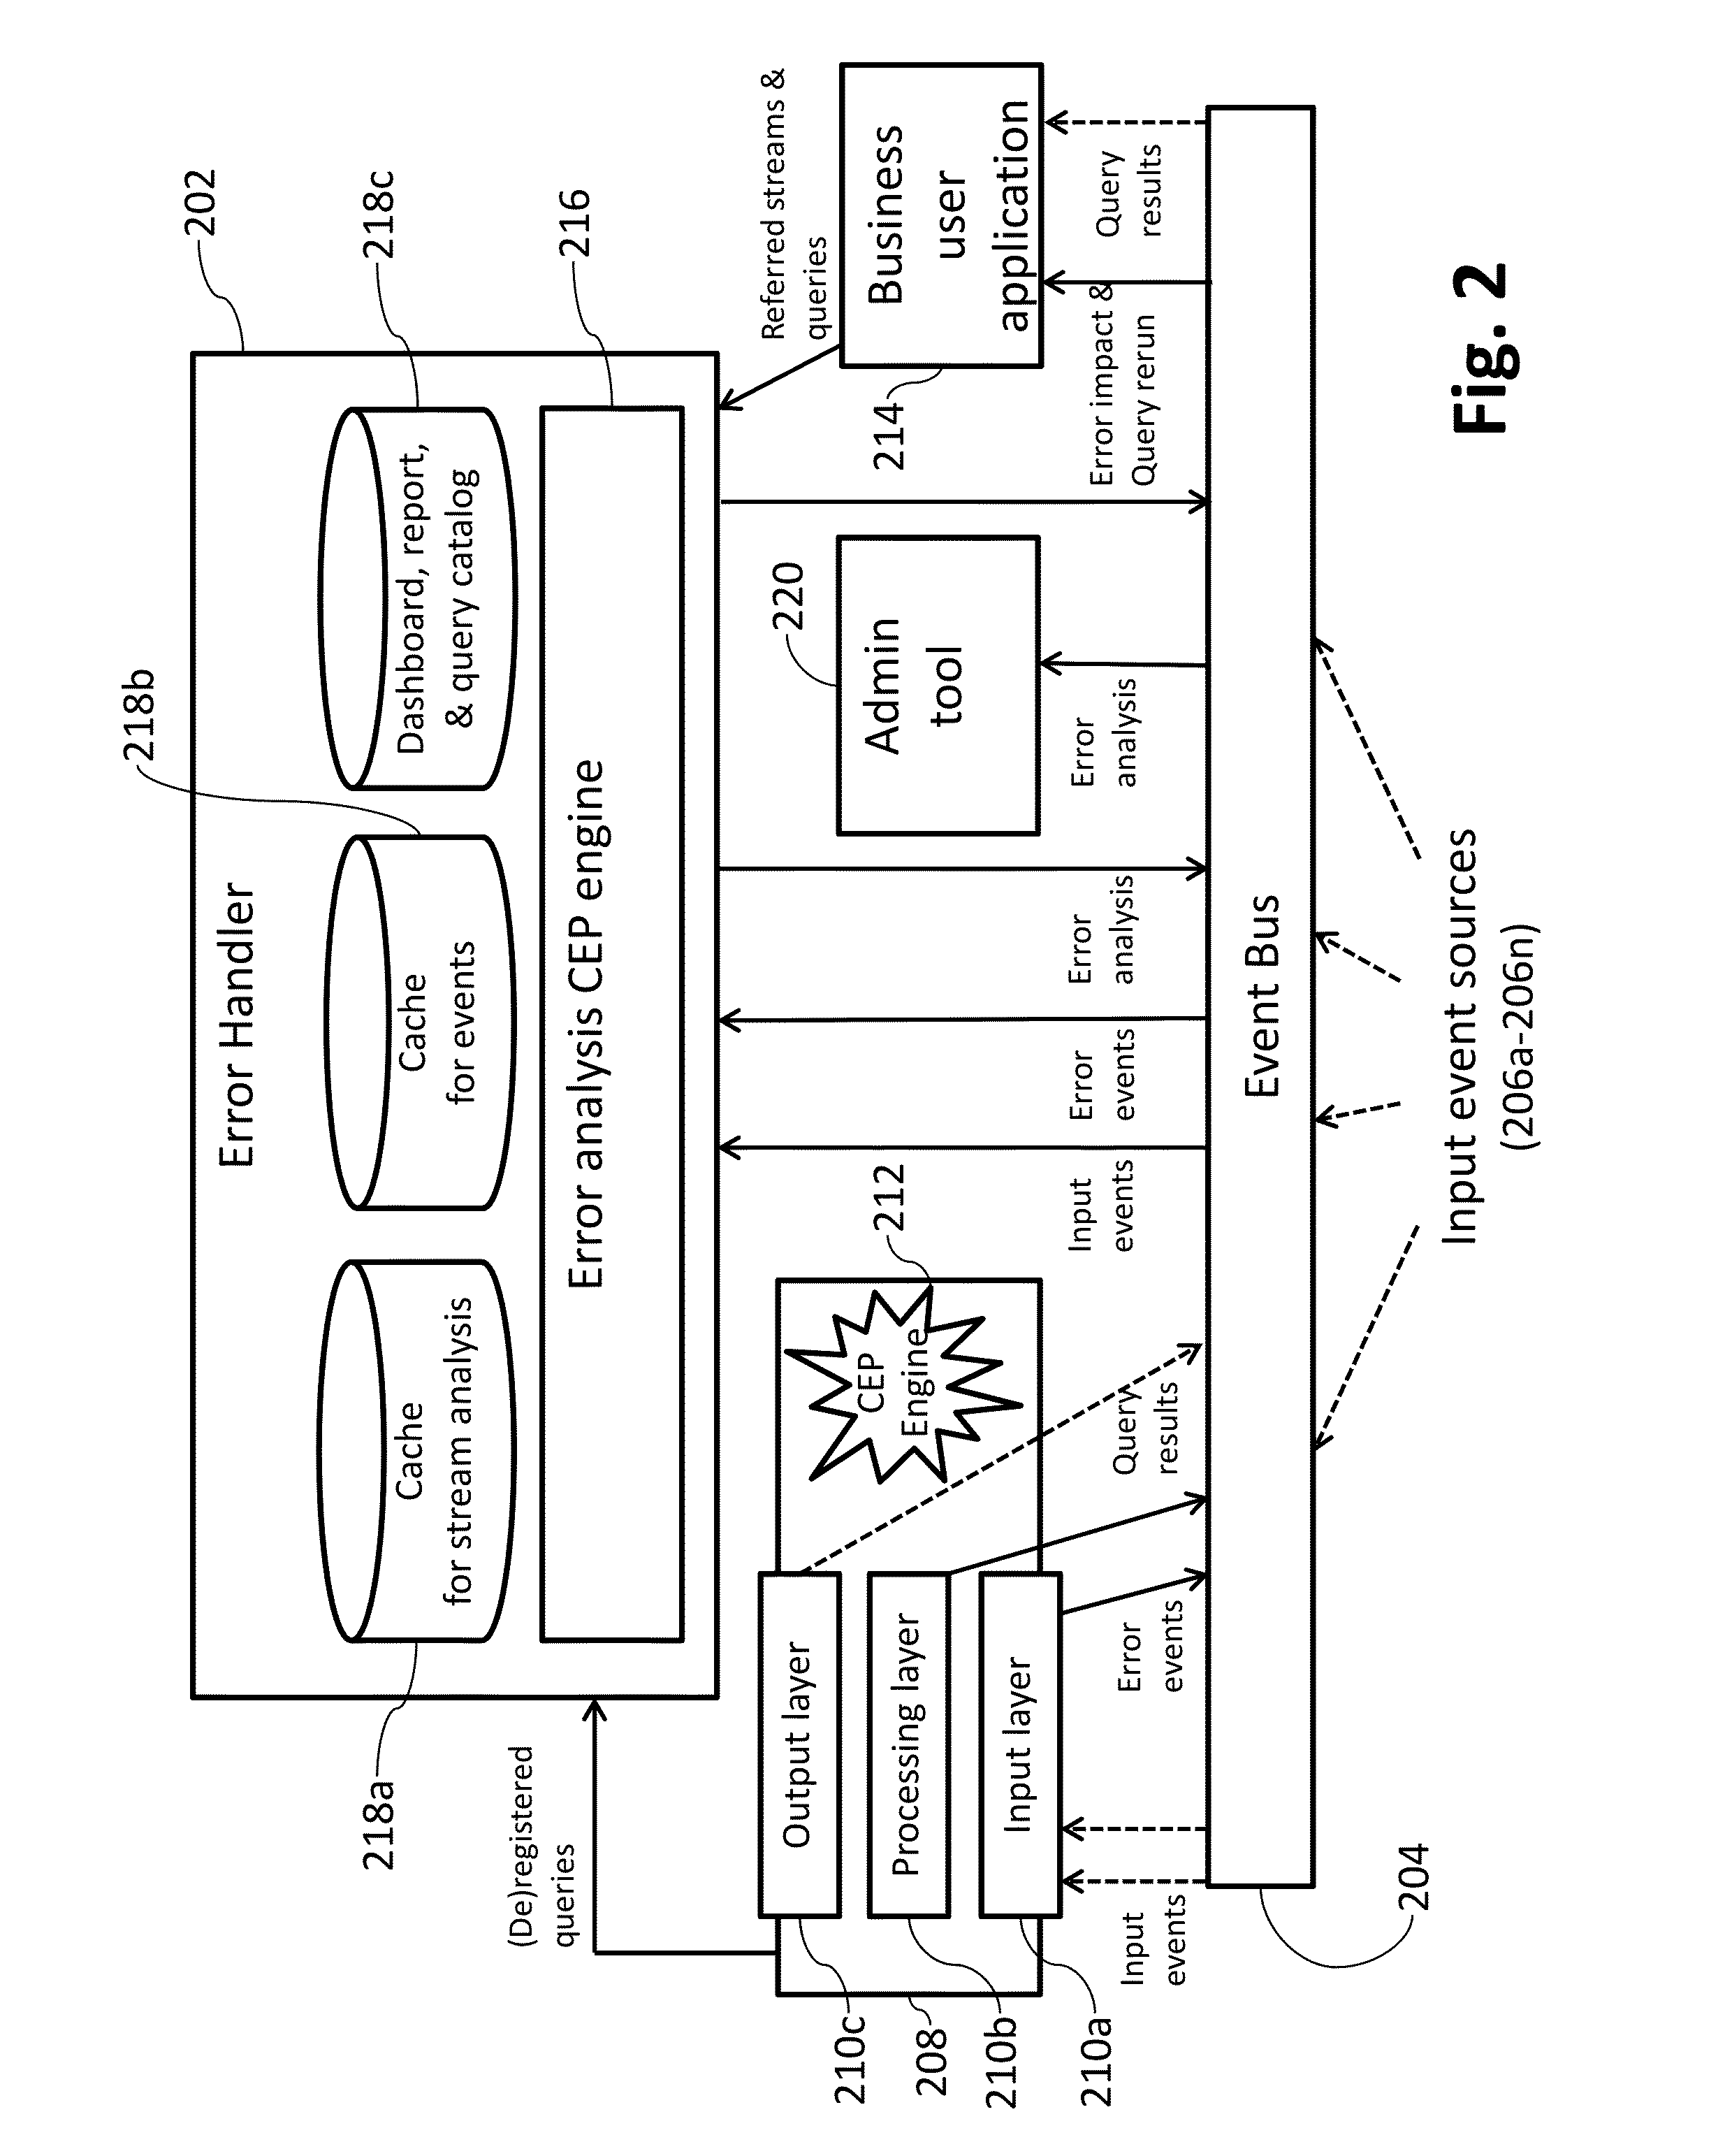 Systems and/or methods for handling erroneous events in complex event processing (CEP) applications